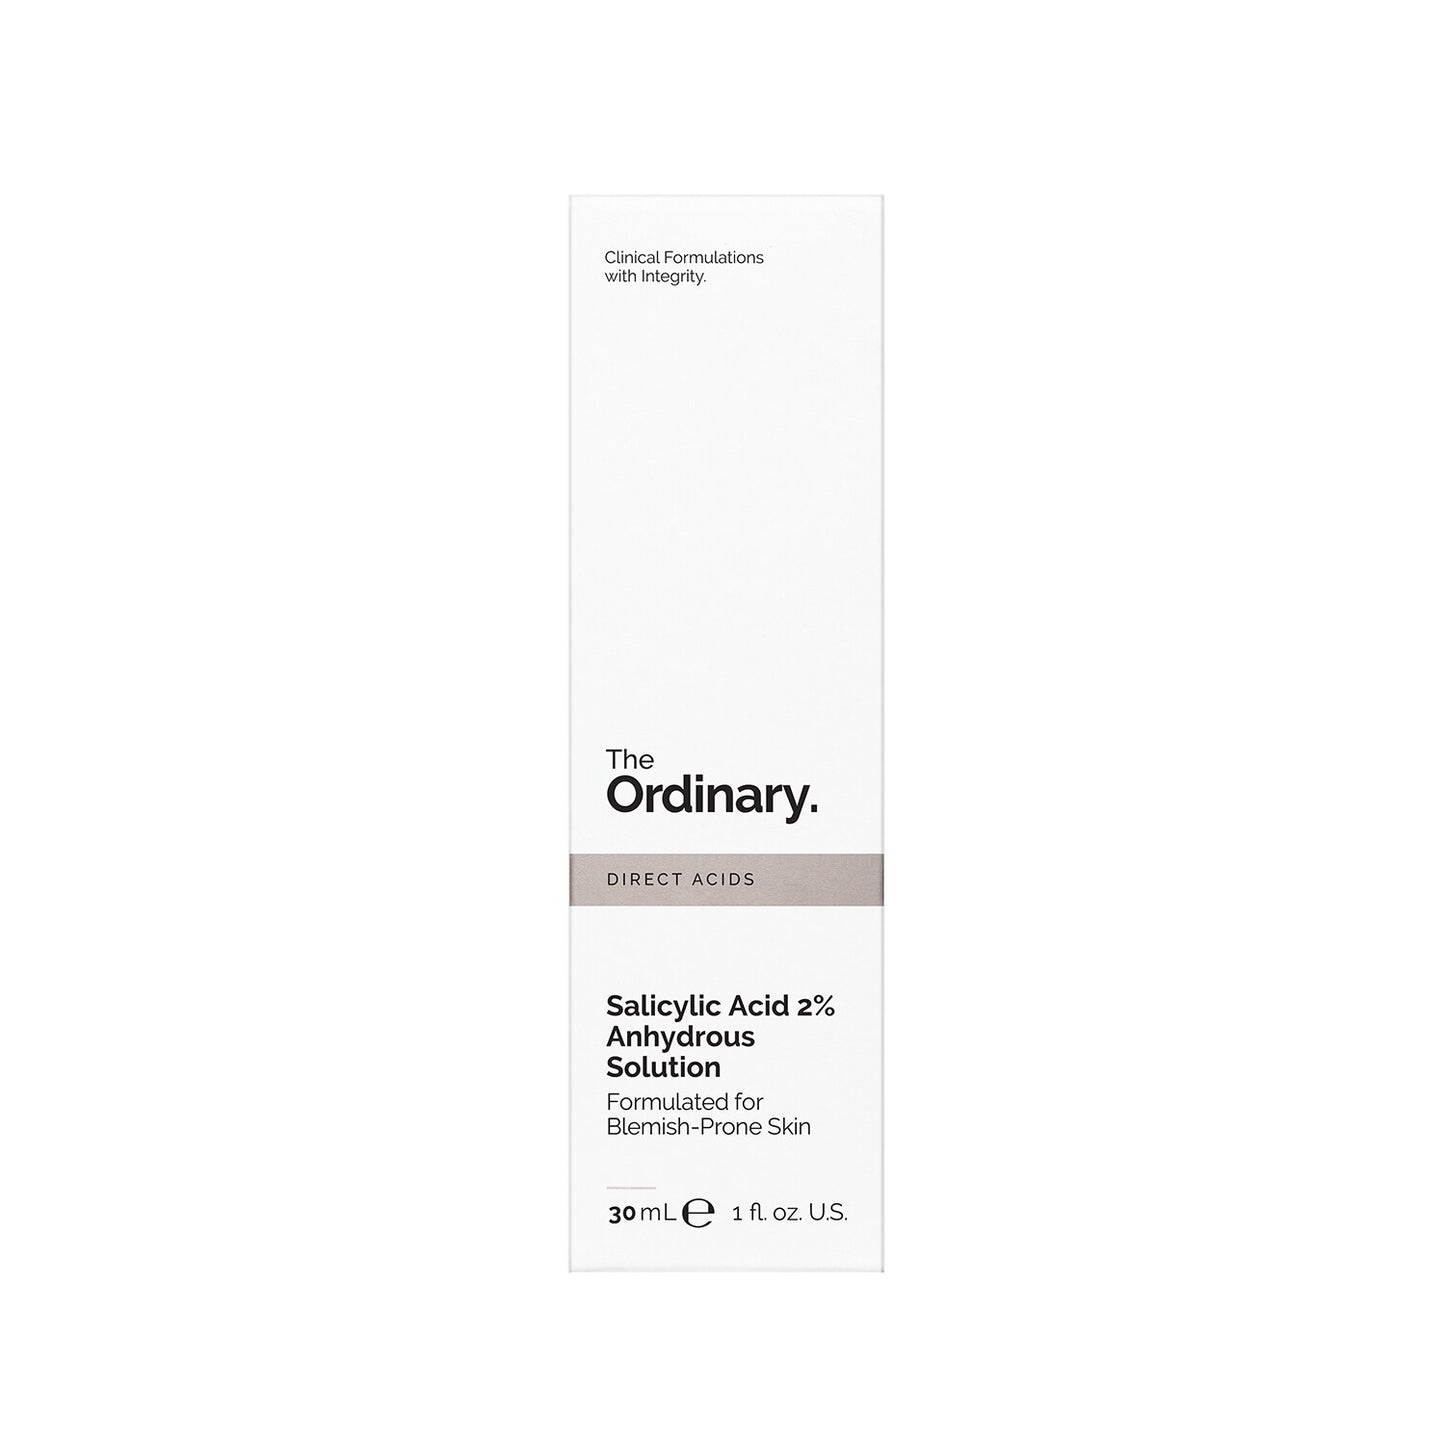 THE ORDINARY - Salicylic Acid 2% Anhydrous Solution - 30ML